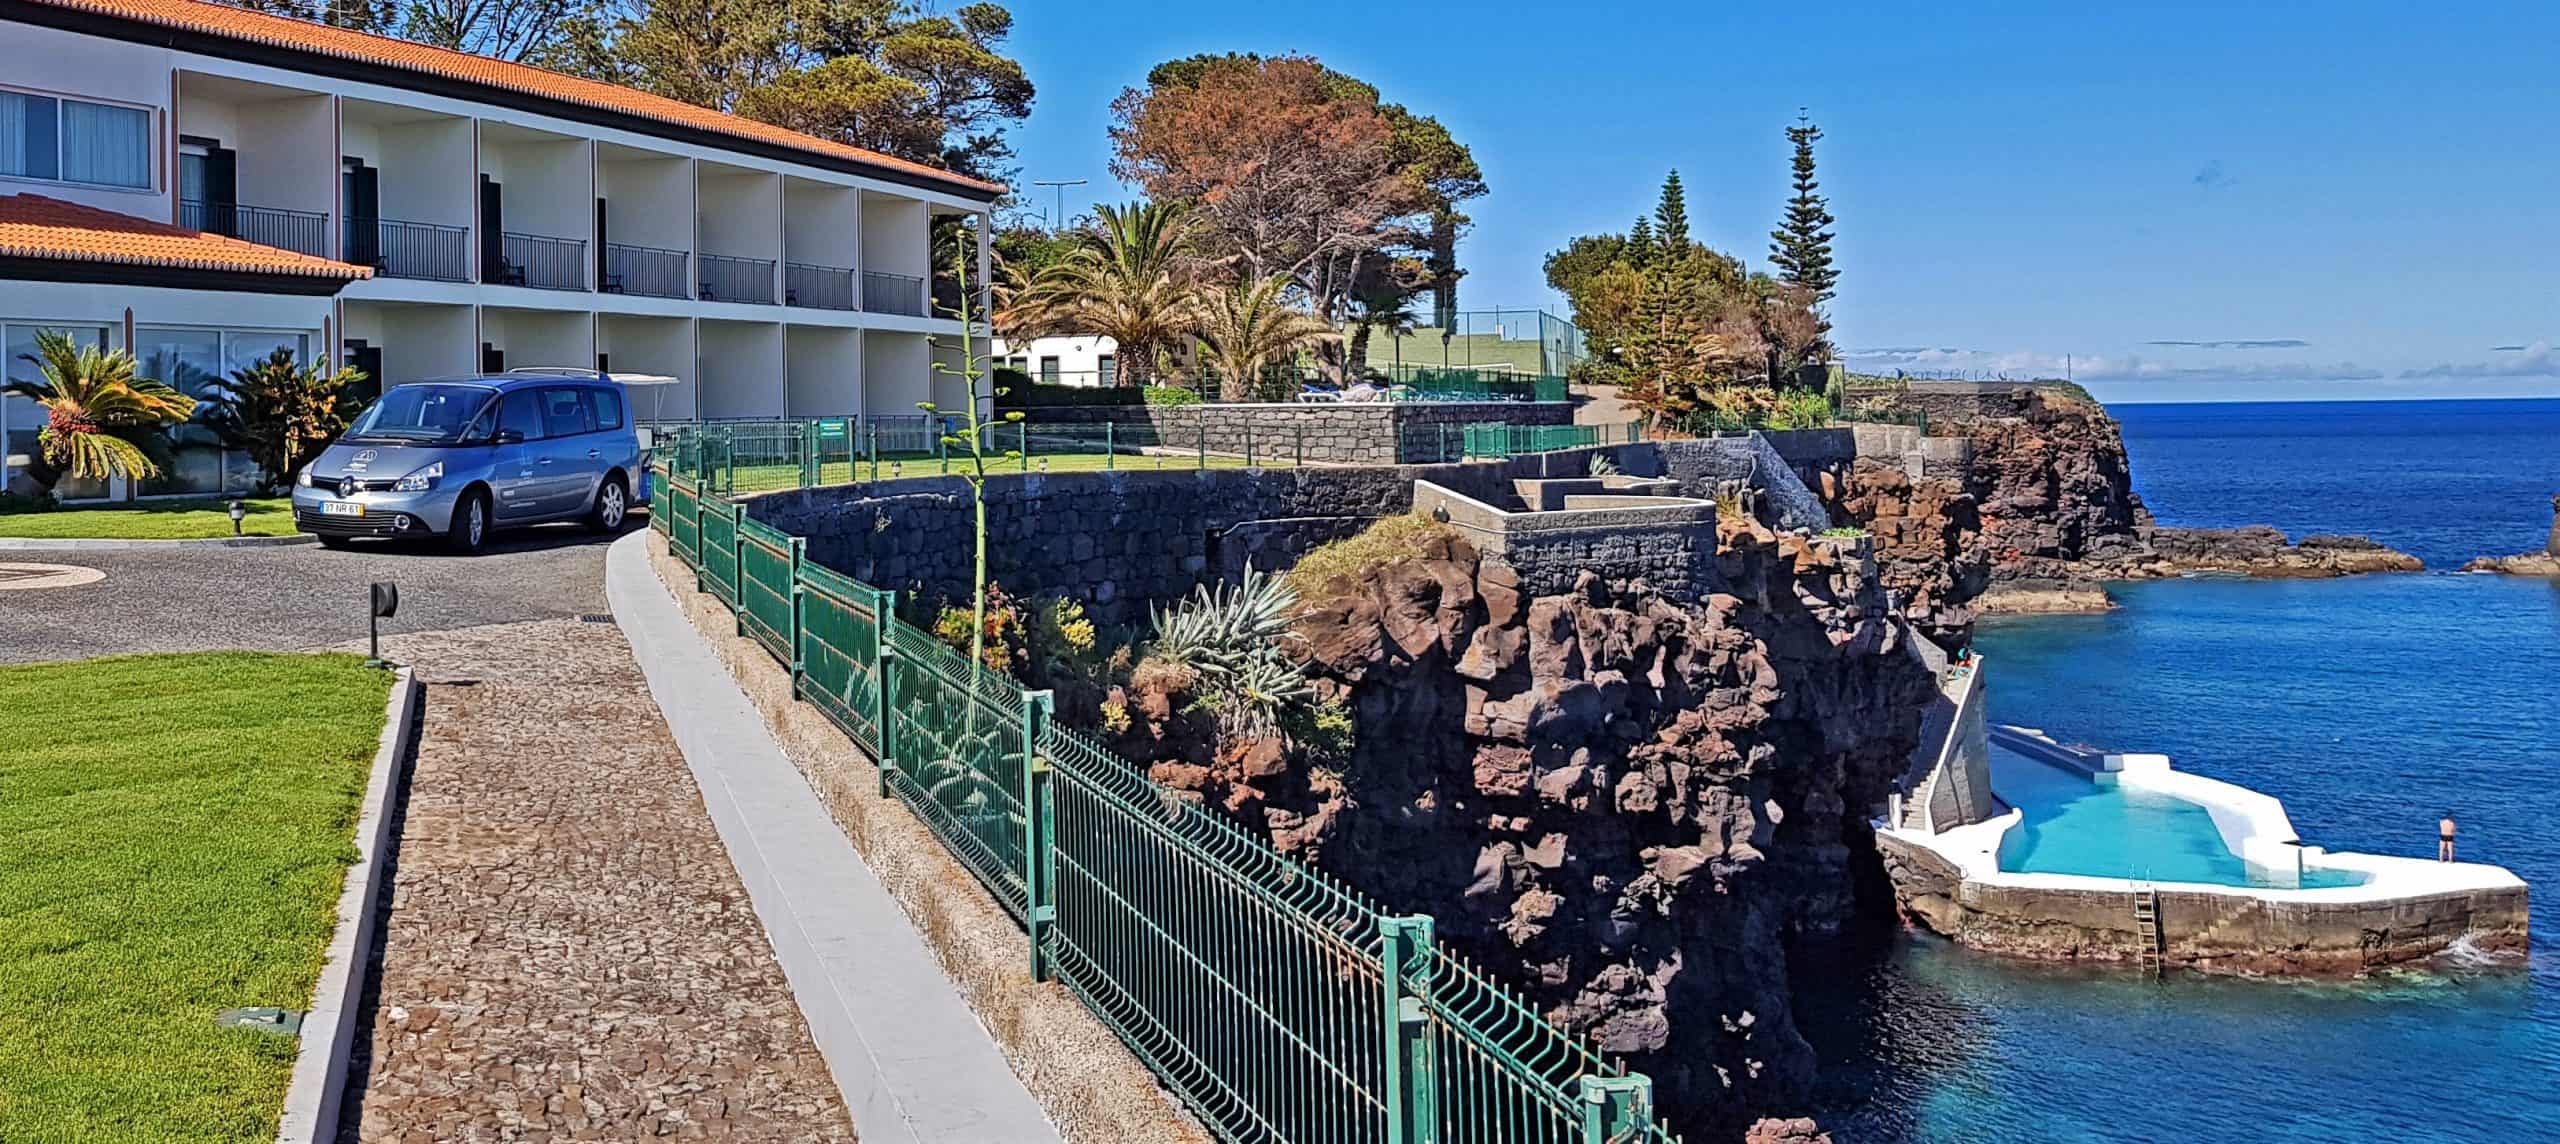 Stay At The Top-rated 5* Albatroz Beach & Yatch Club, Madeira For Only